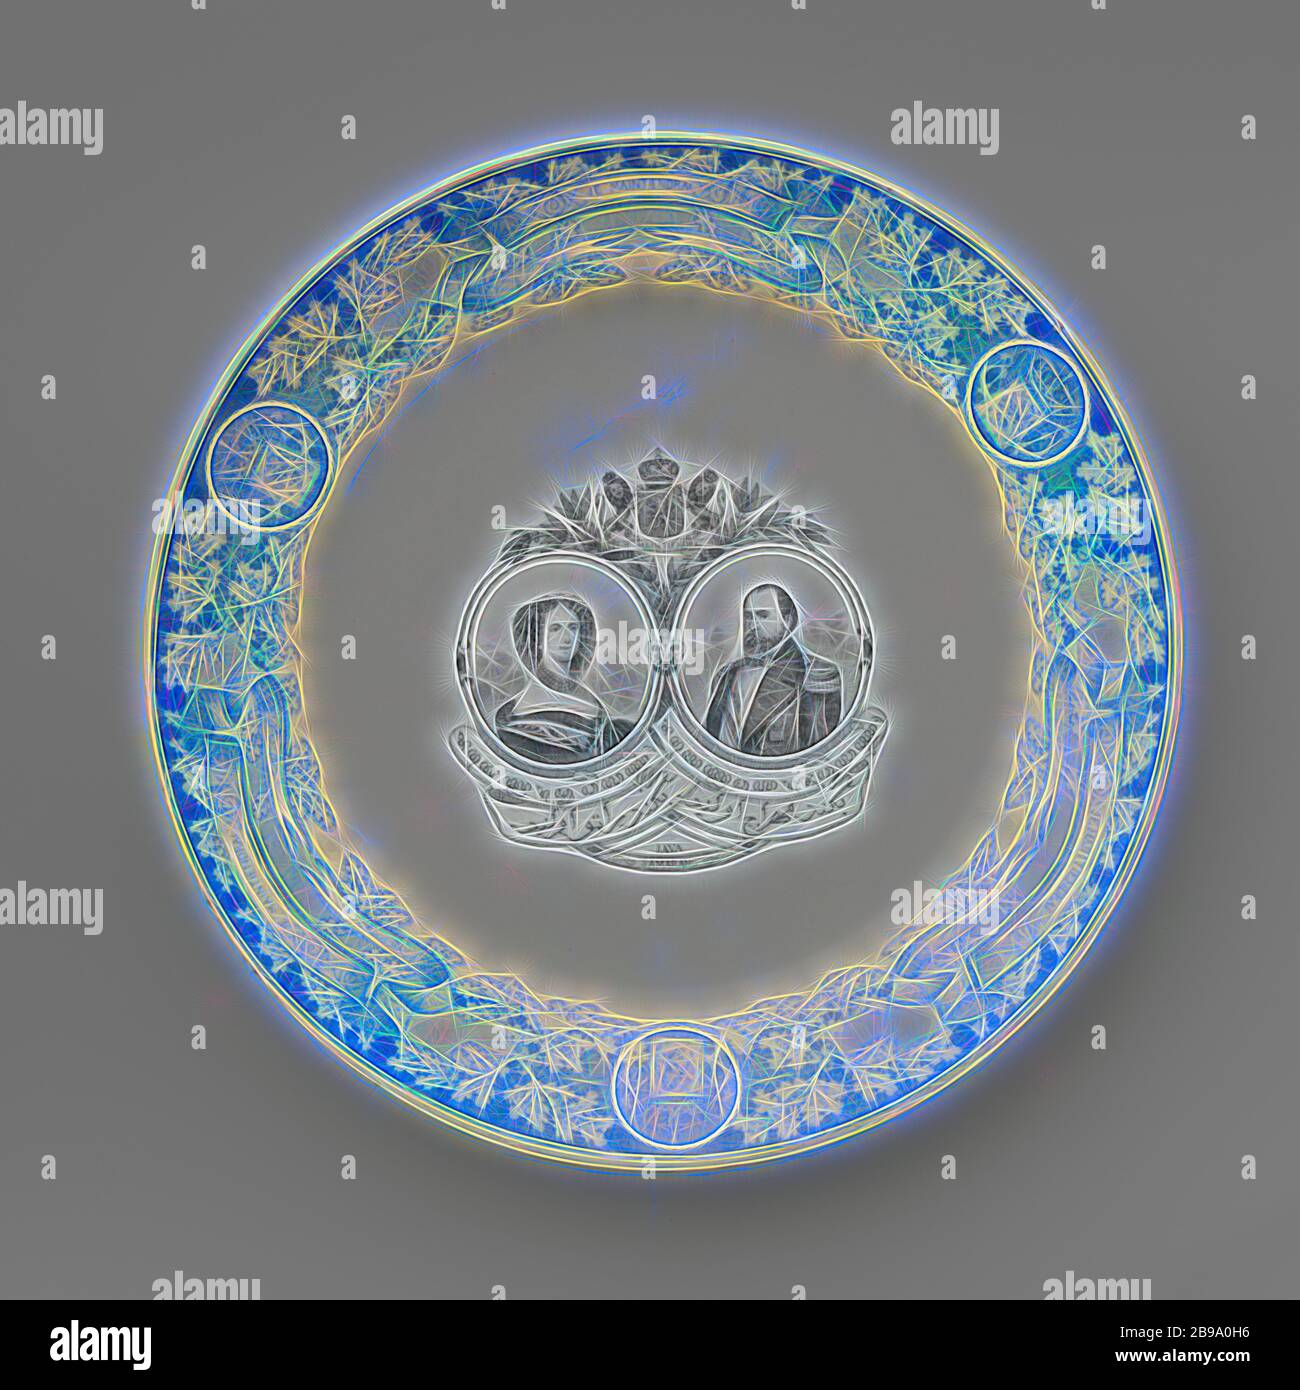 Plate with portraits of Willem III and Sophia of Württemberg on the flat, Pottery plate with portraits of Willem III and Sophia of Württemberg on the flat in black transfer decor. Above the portraits a weapon and a banderolle with the text JE MAINTIENDRAI. Among the portraits are banderolles with JAVA and SAMARANG, and texts in Malay and Arabic. The edge of the board with a blue transfer decor with three banderole lessons that says: JE MAINTIENDRAI, and three medallions with a weapon. Here between acorns and oak leaves., N.V. Société Céramique, Maastricht, c. 1863 - c. 1958, earthenware, h 2.9 Stock Photo